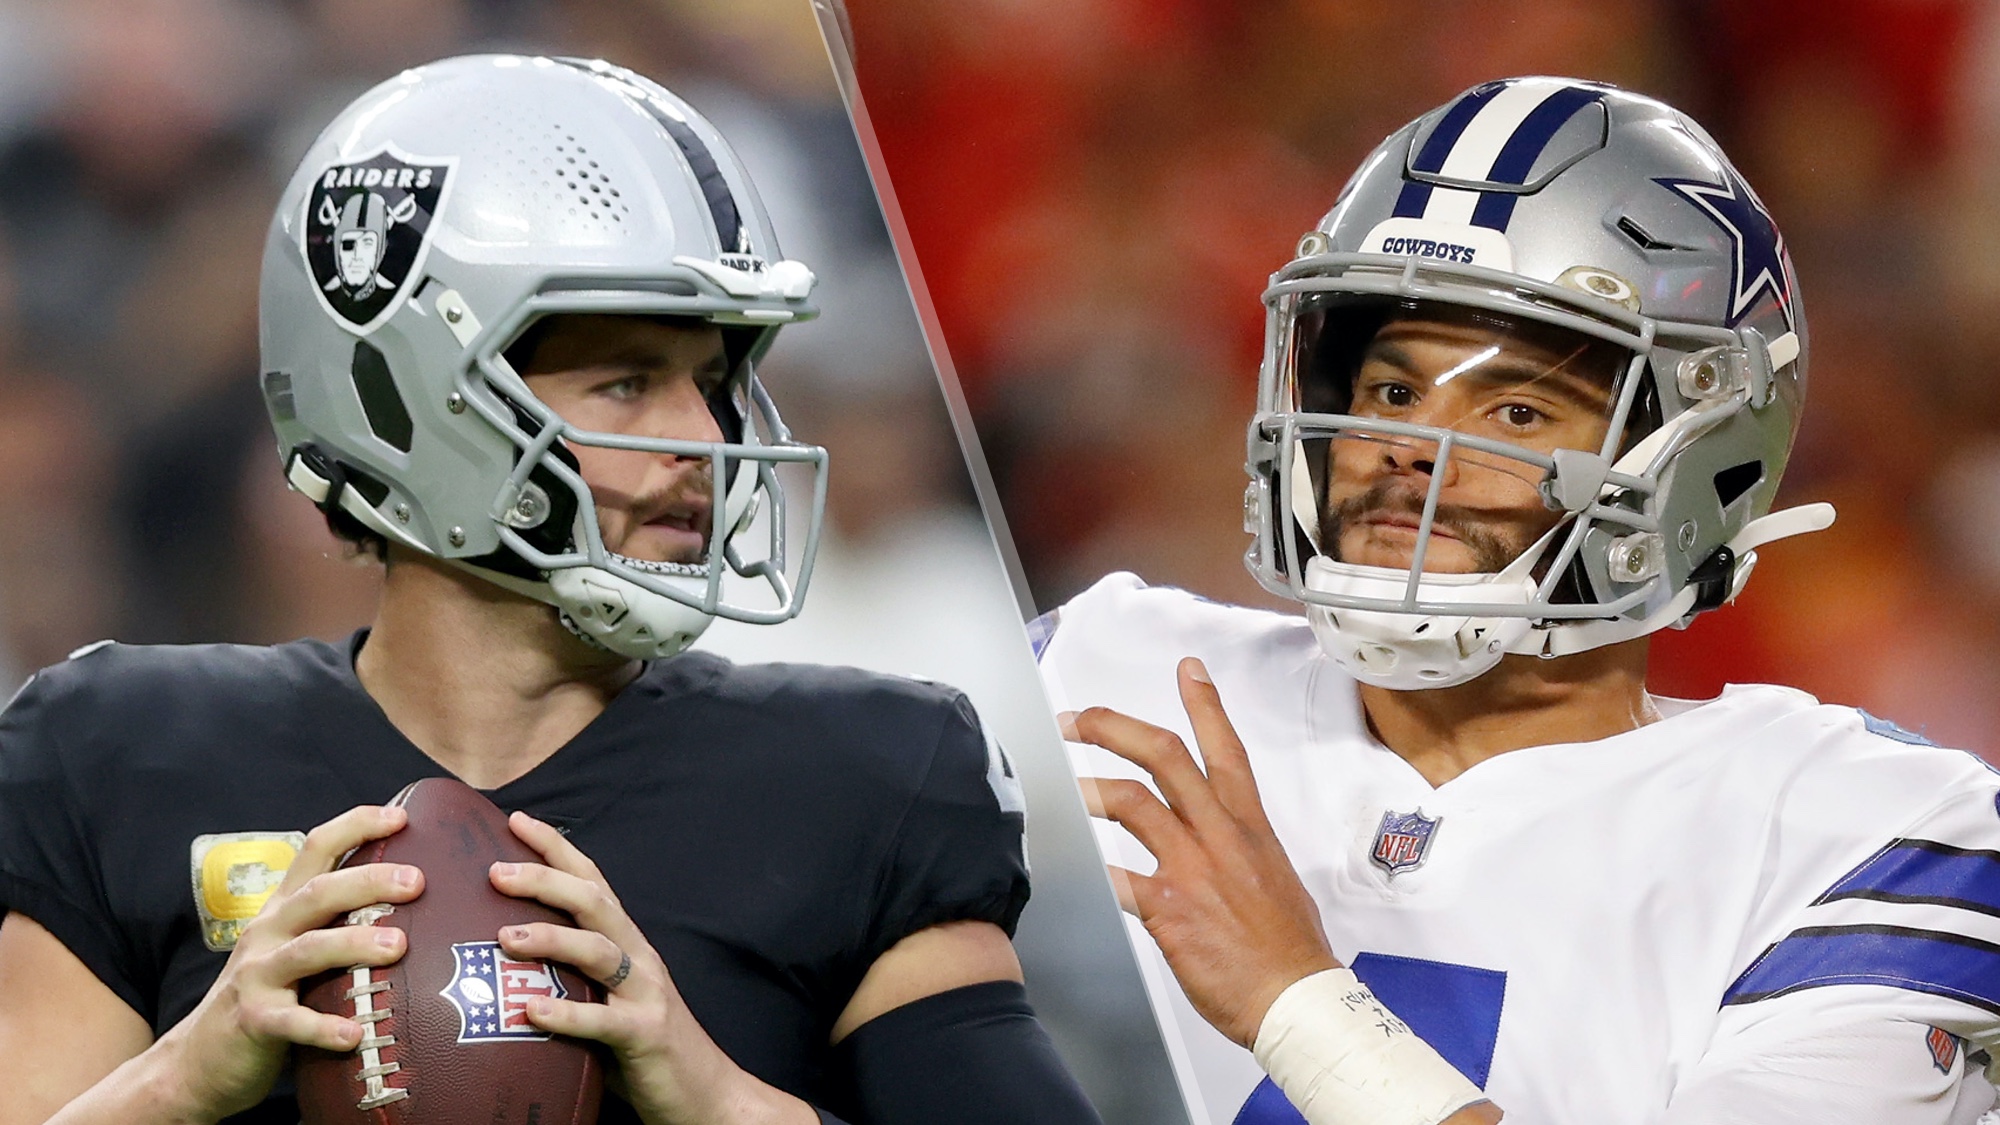 Raiders vs Cowboys live stream is today: How to watch NFL